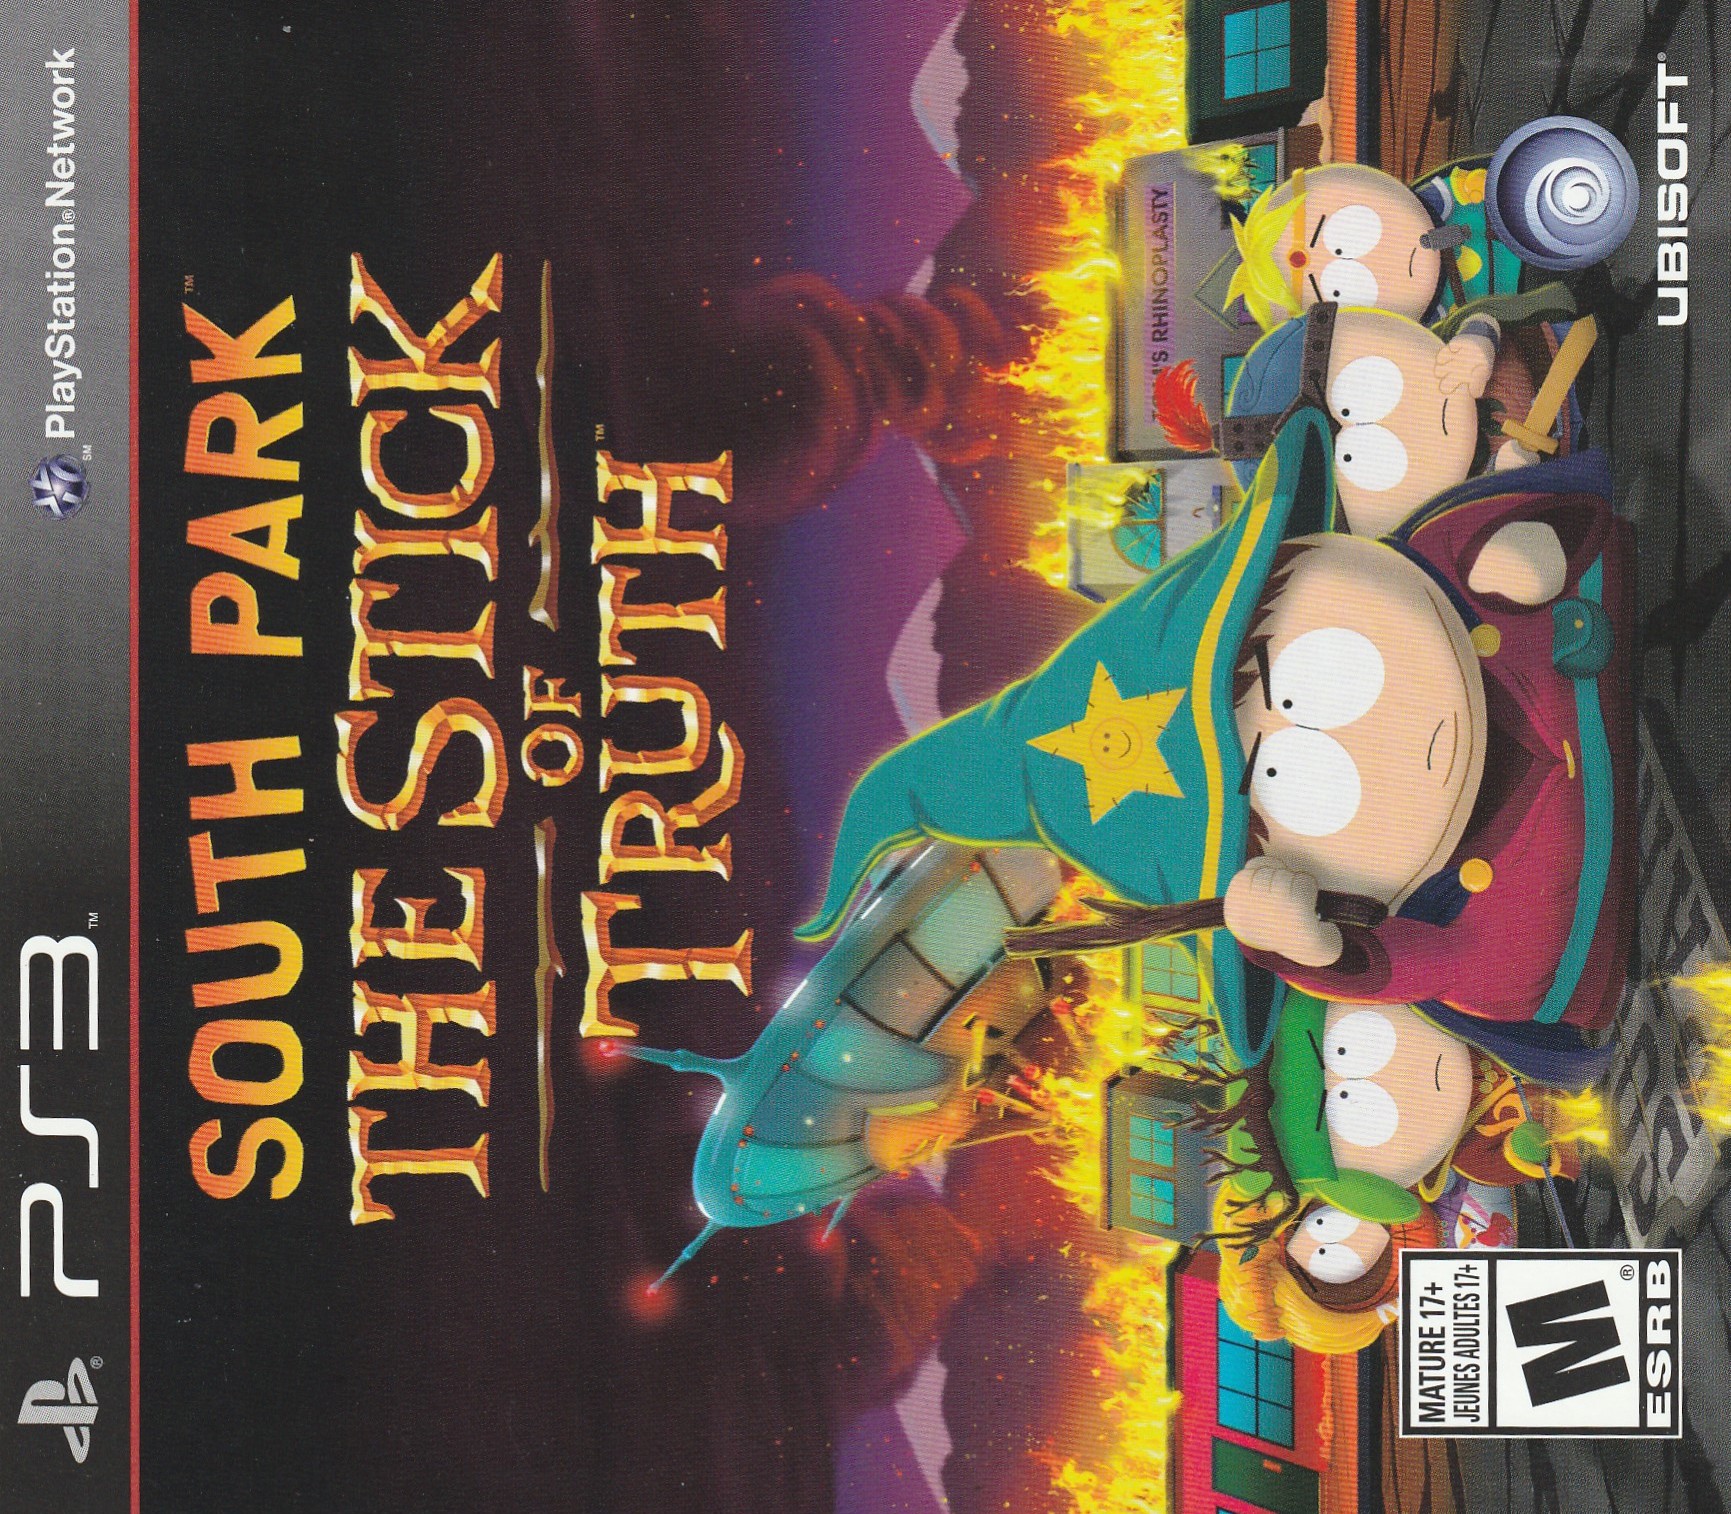 'South Park: Stick of Truth'